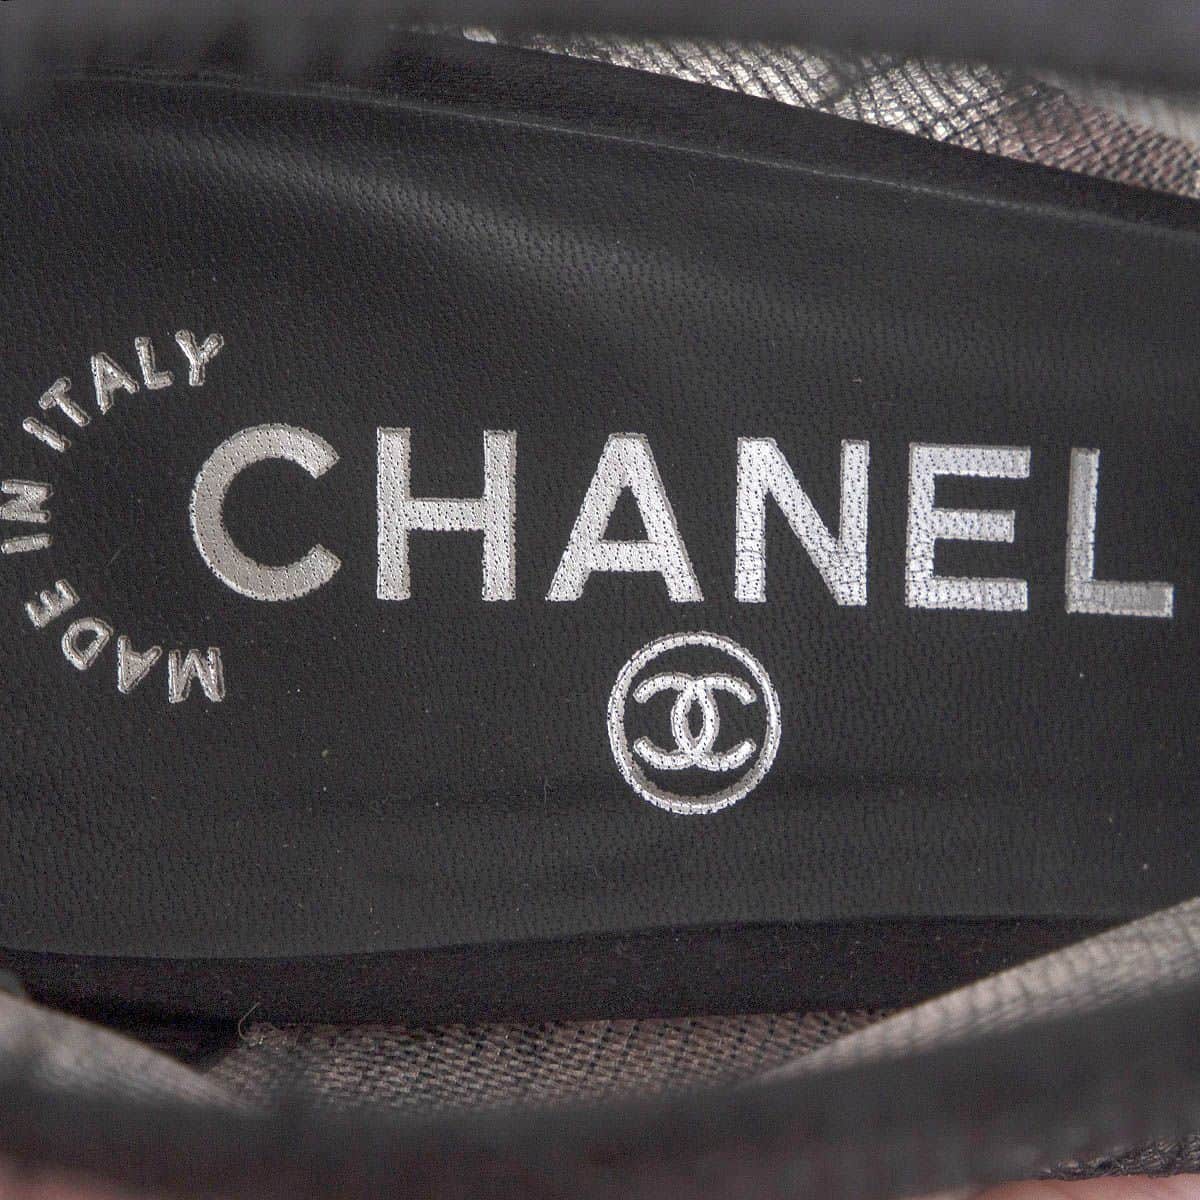 is chanel made in china